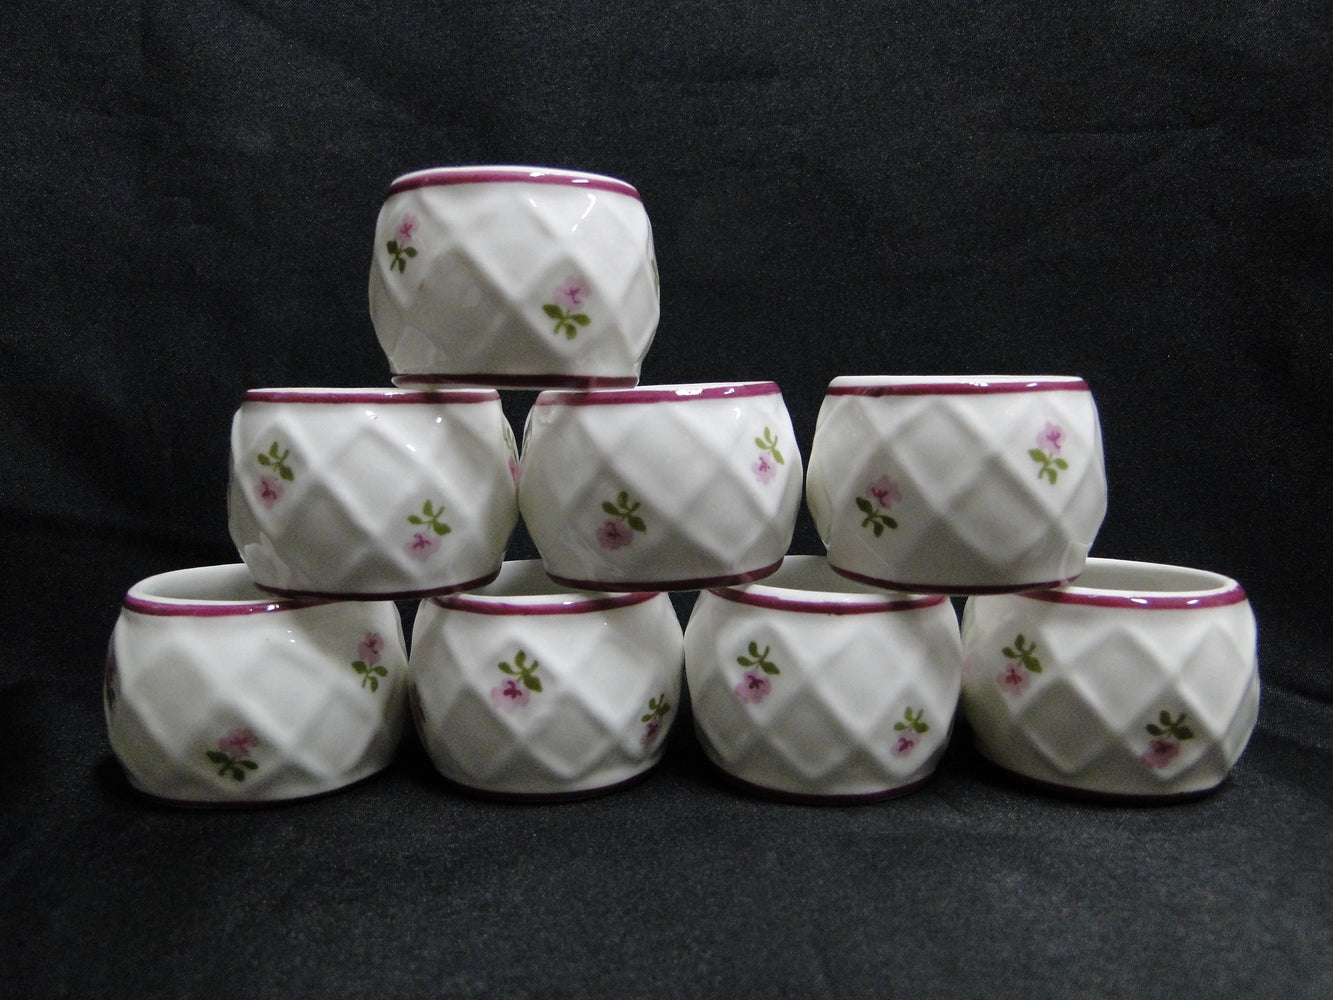 Pia, Philippines, Pink Flowers, Red Trim: Set of 8 Napkin Holders / Rings